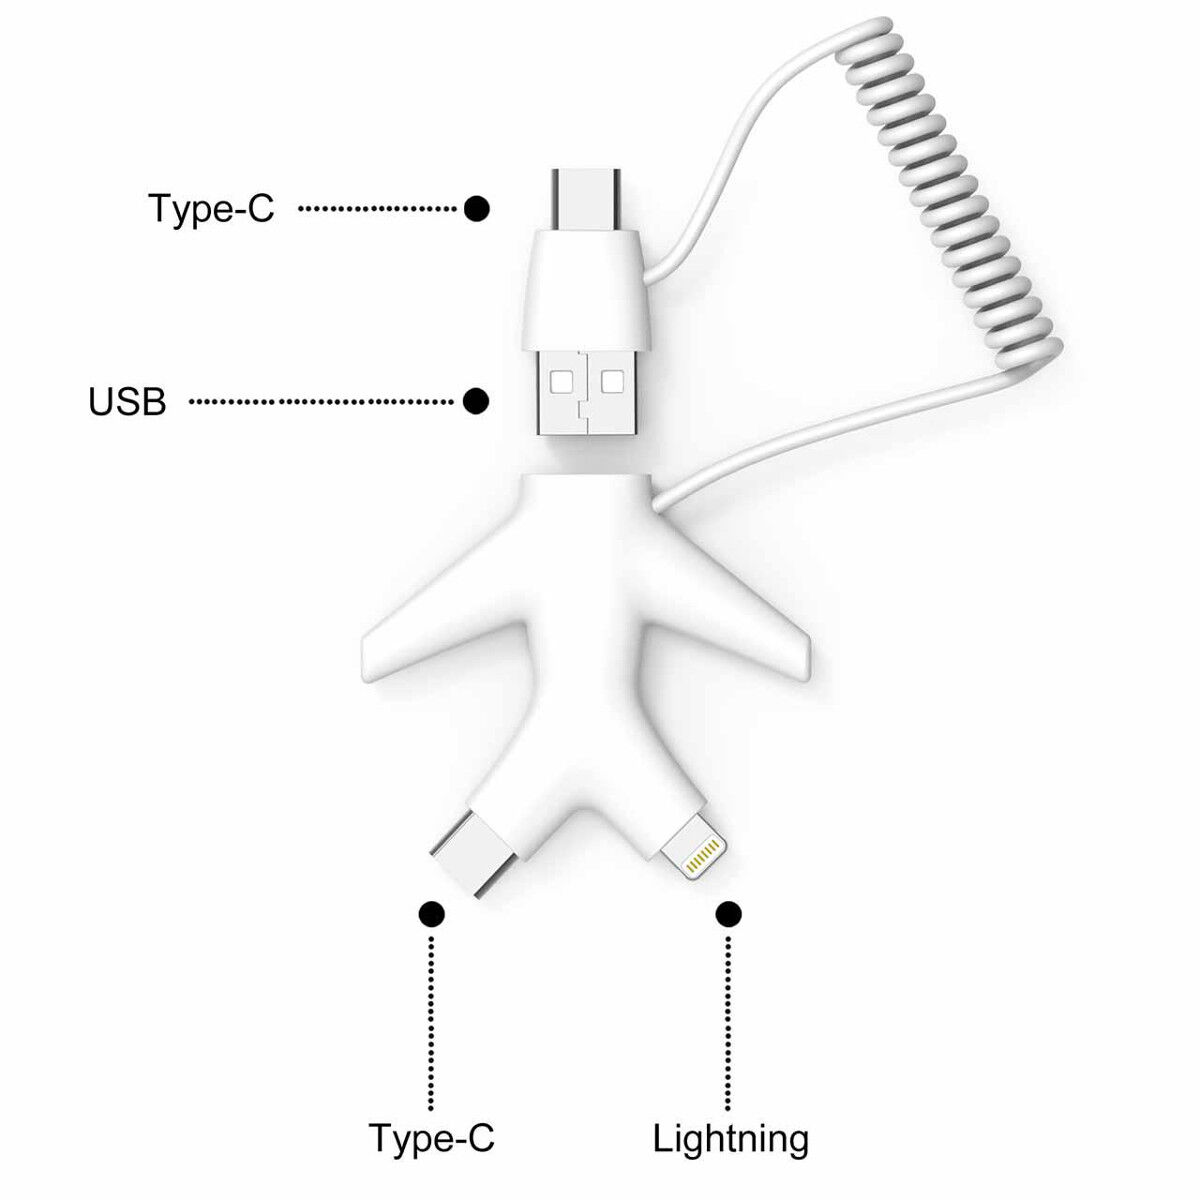 Xoopar Fly Charging Cable